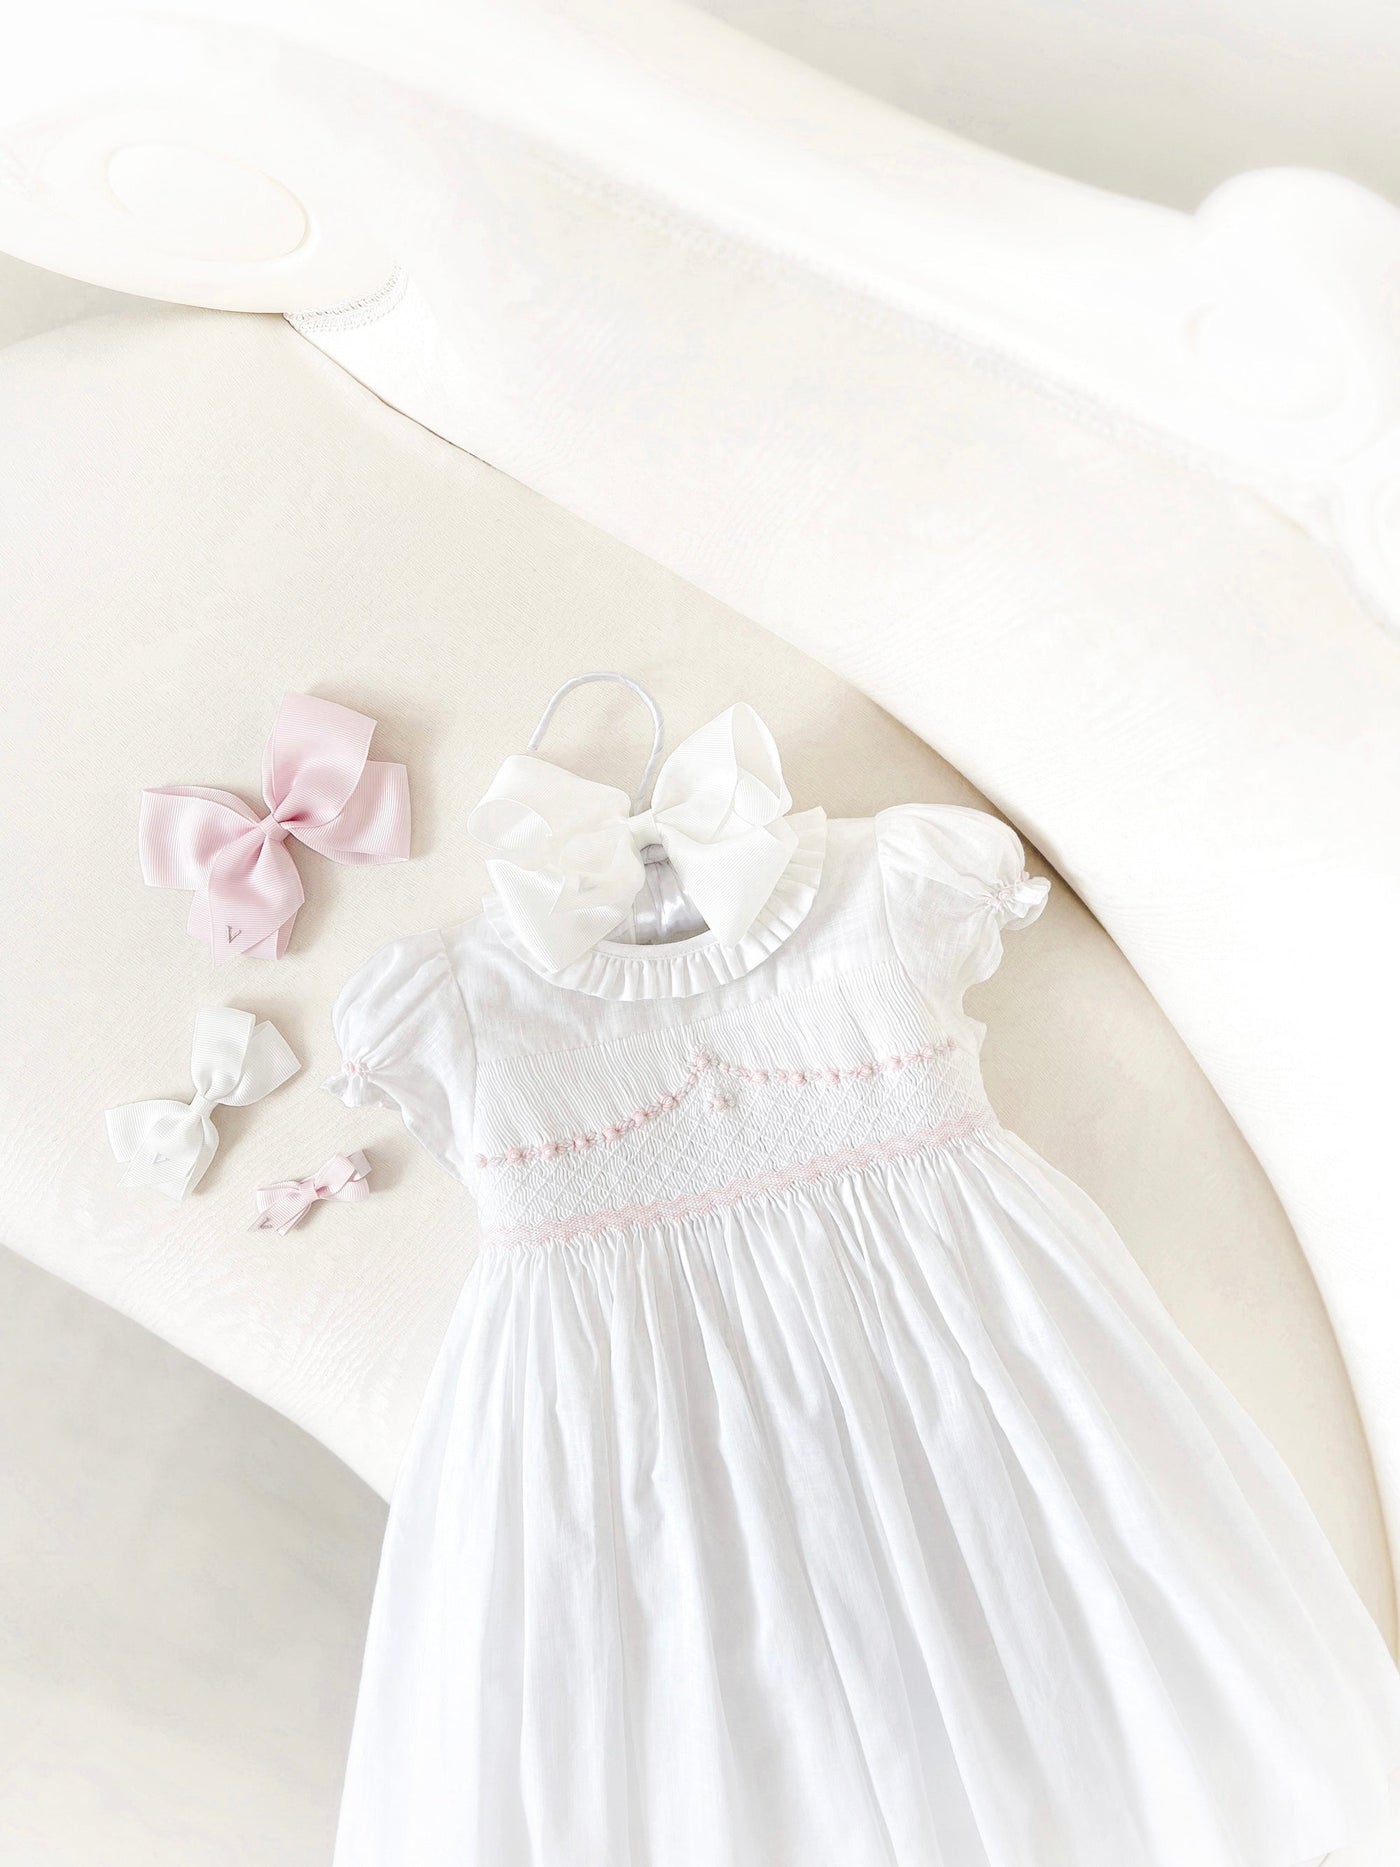 Beautiful traditional white smocked dresses for your little girl's portrait, heirloom photos, vignettes or christening, baptism, holy communions and other religious ceremonies Charlotte sy Dimby